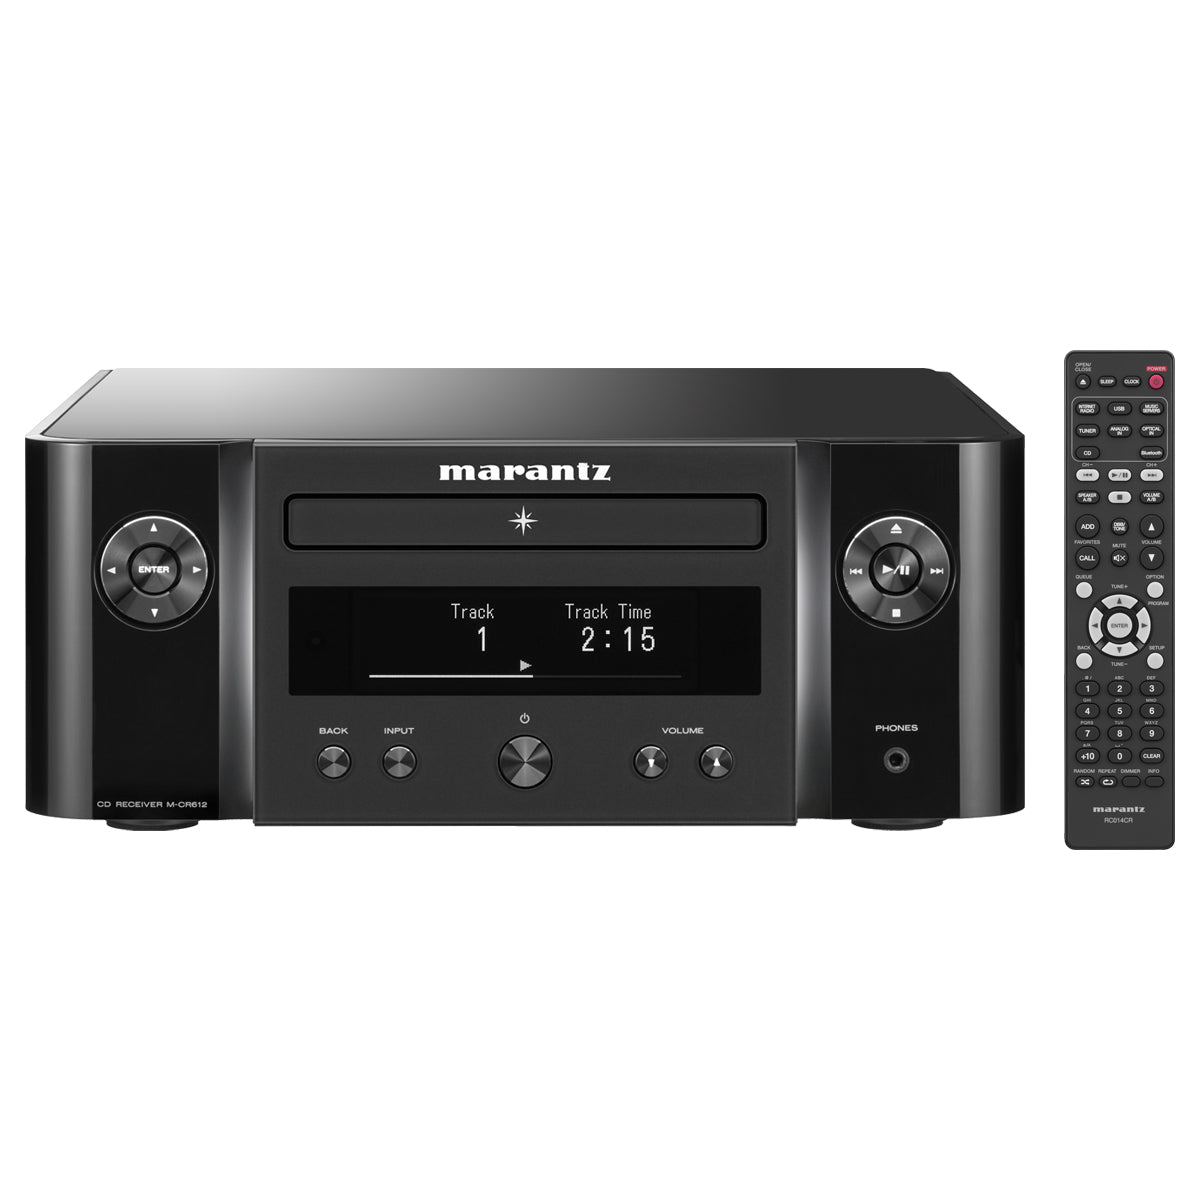 Marantz CR612 Compact Network CD Receiver with HEOS - Black - The Audio Experts